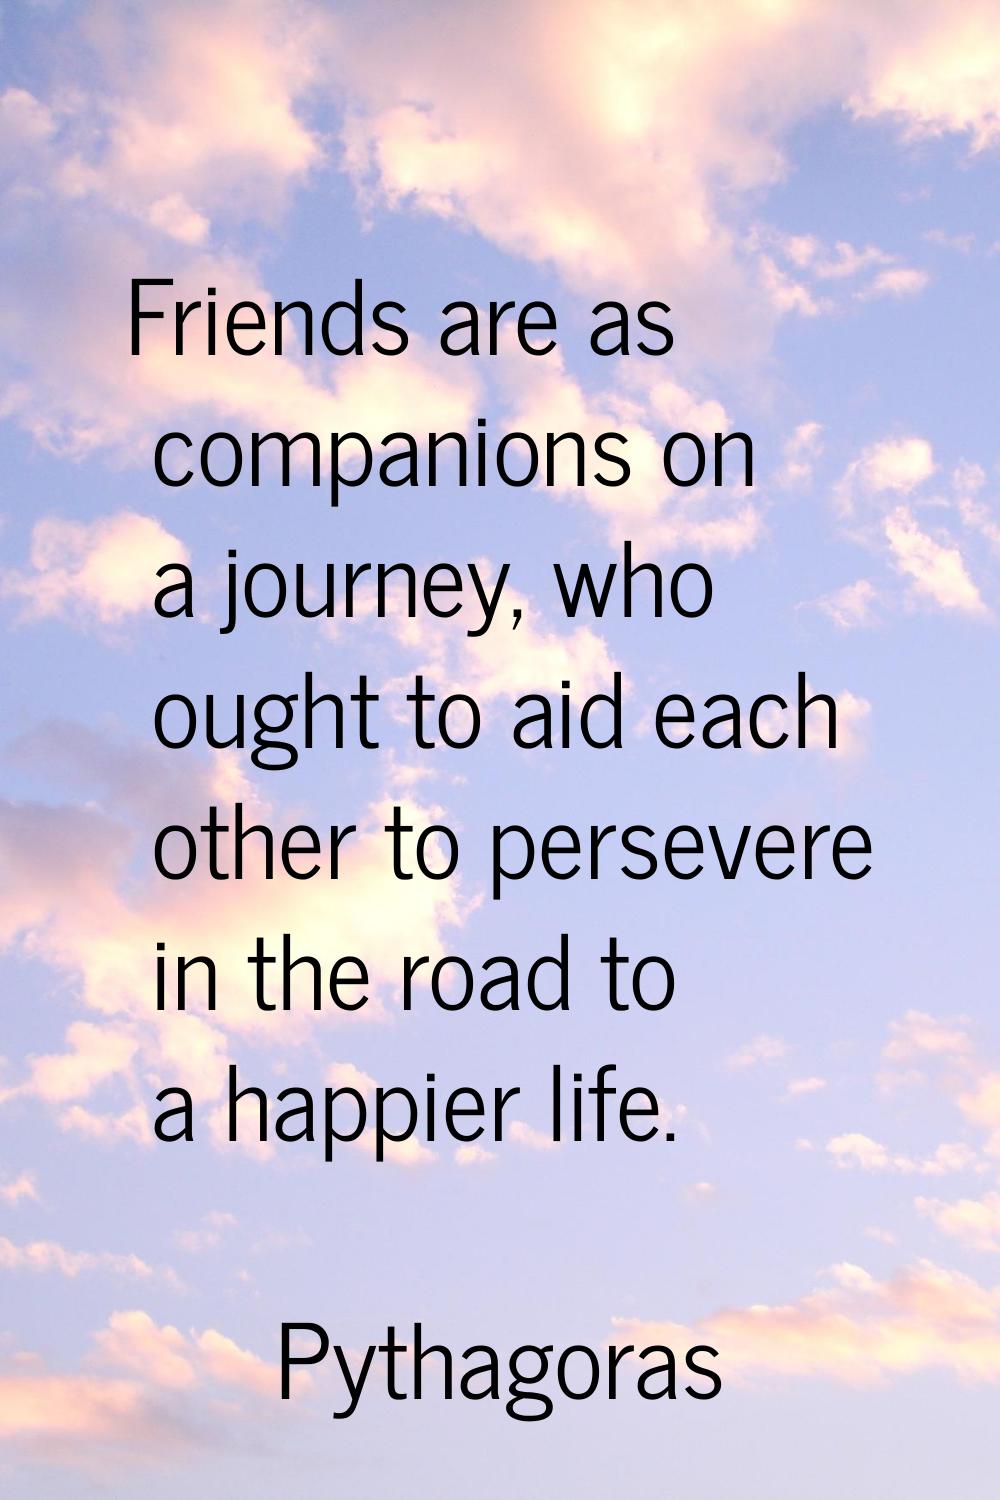 Friends are as companions on a journey, who ought to aid each other to persevere in the road to a h